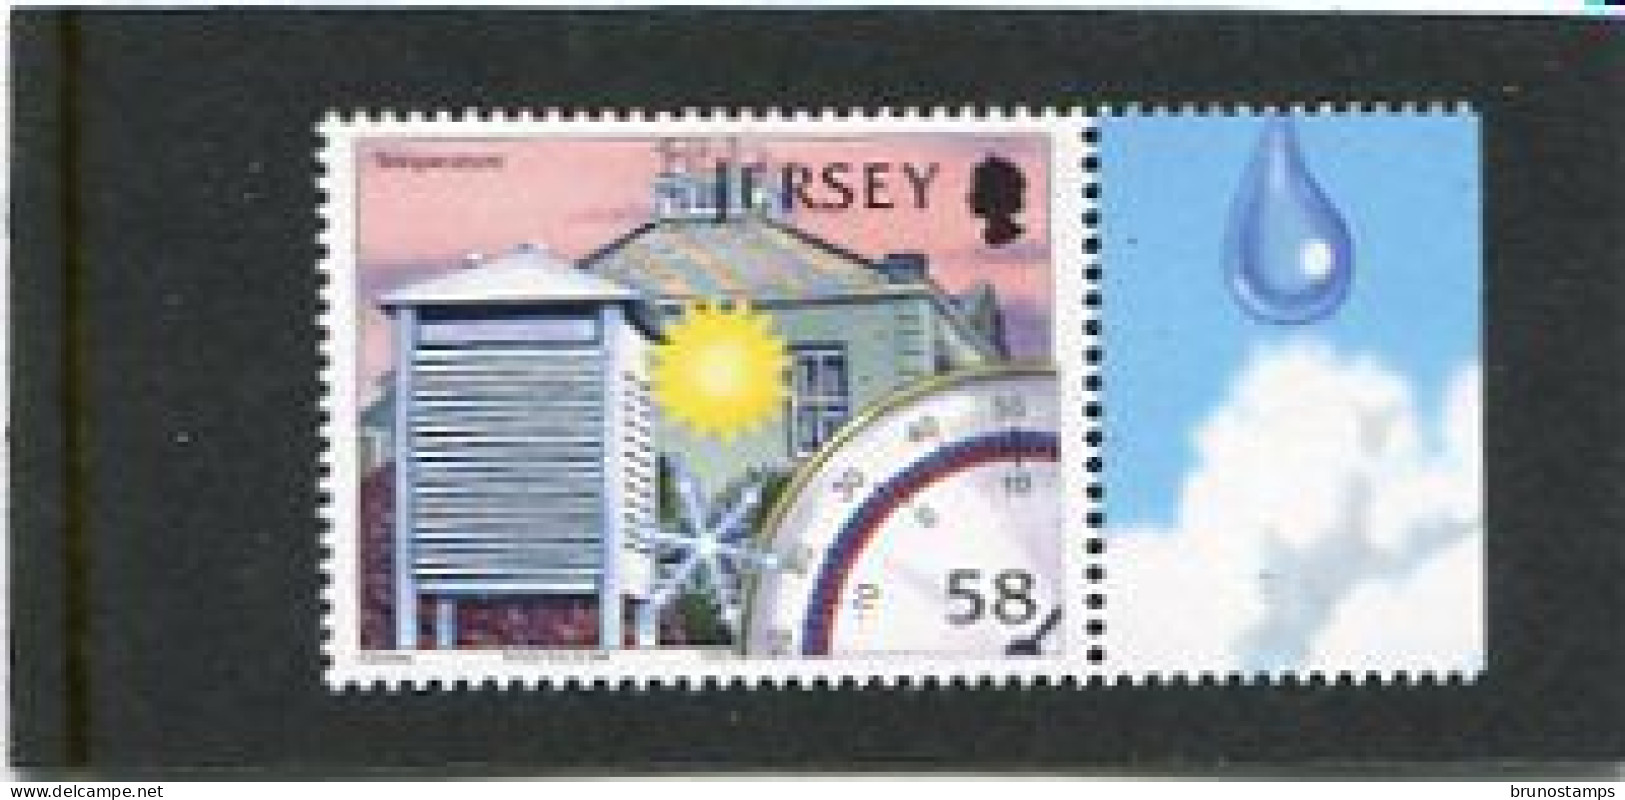 JERSEY - 2008  58p  METEOROLOGICAL SIGNALS  MINT NH - Jersey